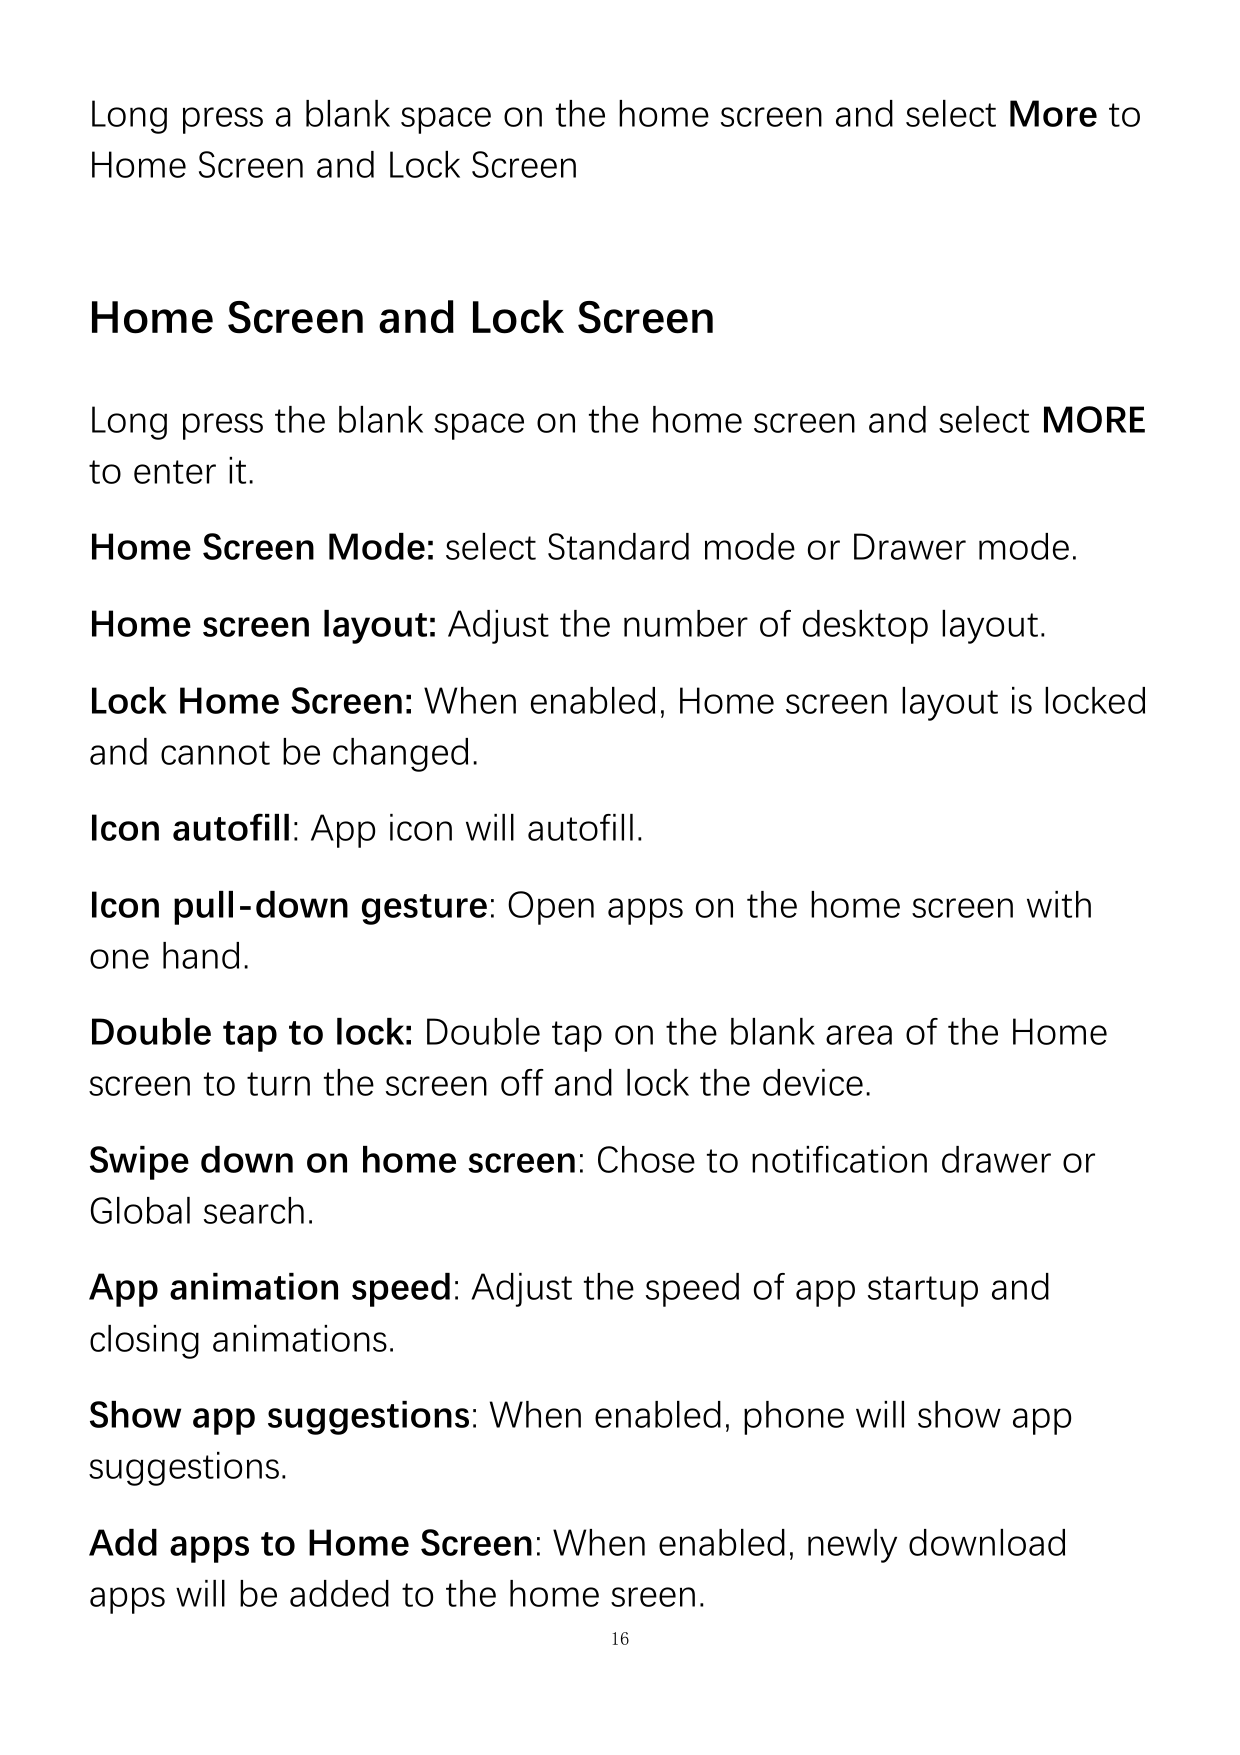 Long press a blank space on the home screen and select More toHome Screen and Lock ScreenHome Screen and Lock ScreenLong press t